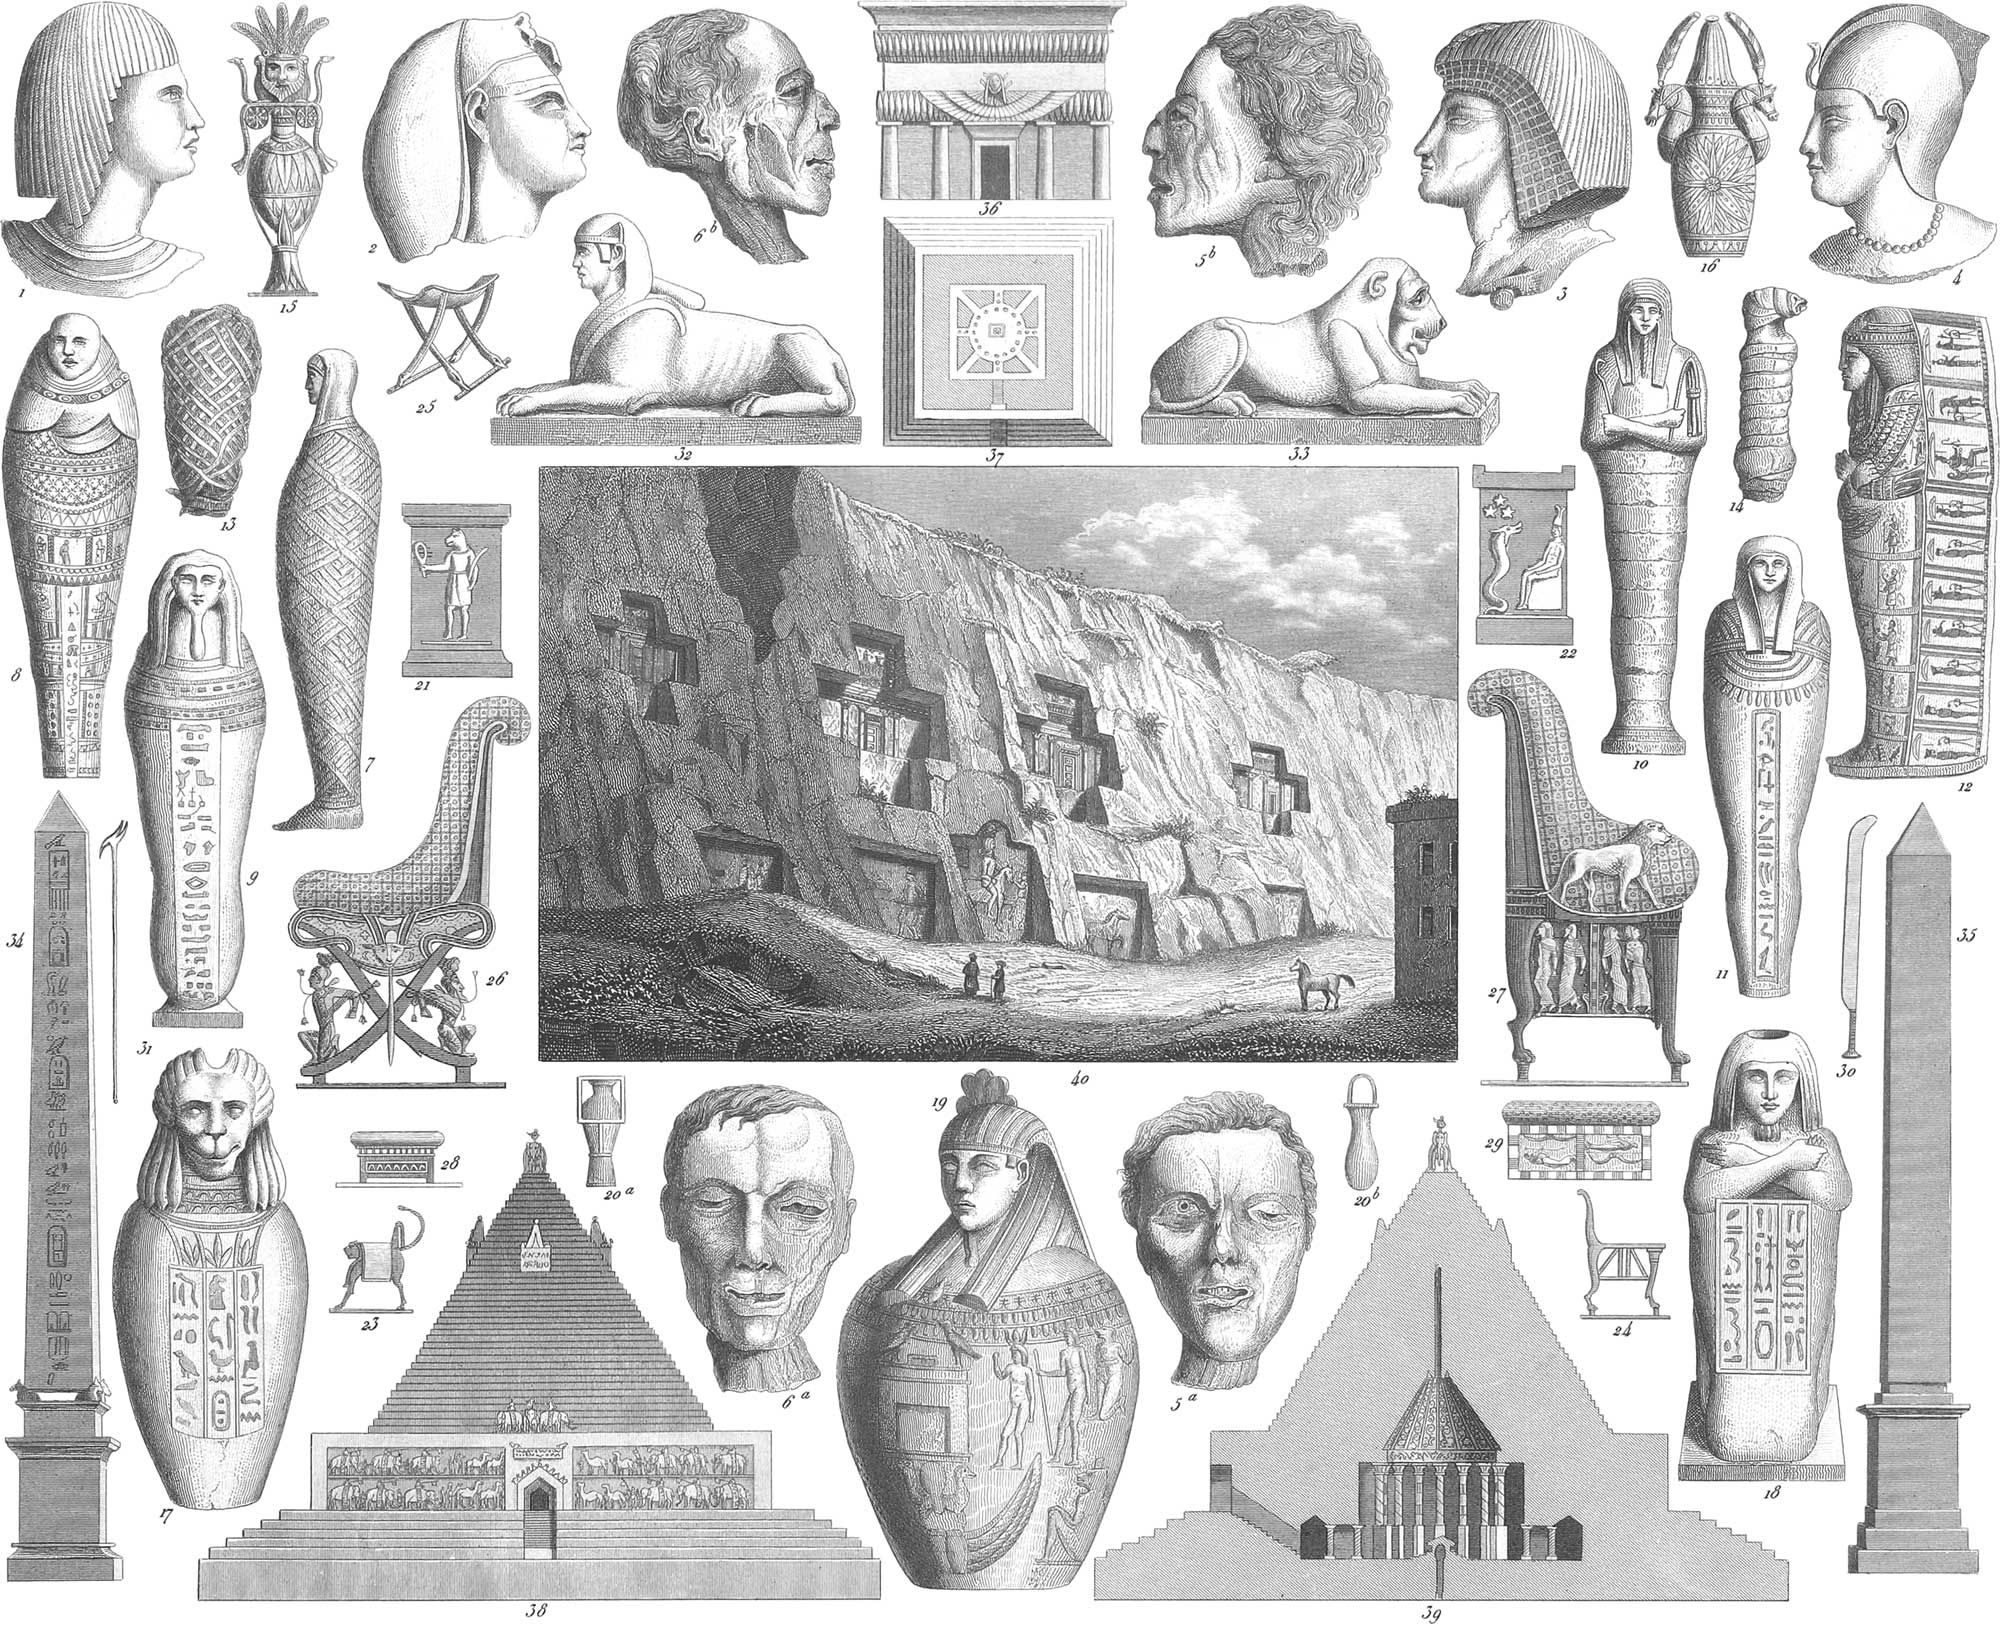 History & Ethnology - Iconographic Encyclopædia of Science